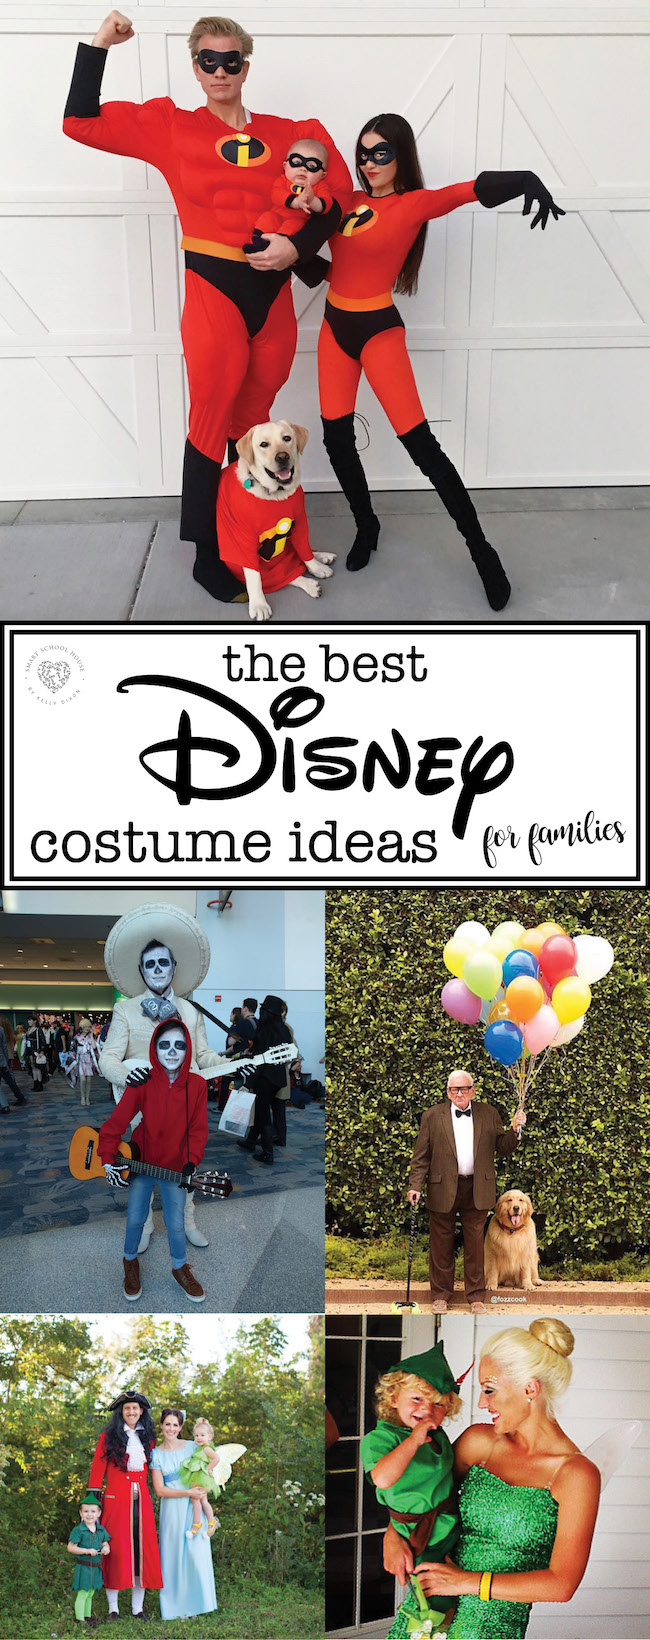 The BEST Disney Halloween Costume Ideas for Families for a night of trick-or-treating or a fun party